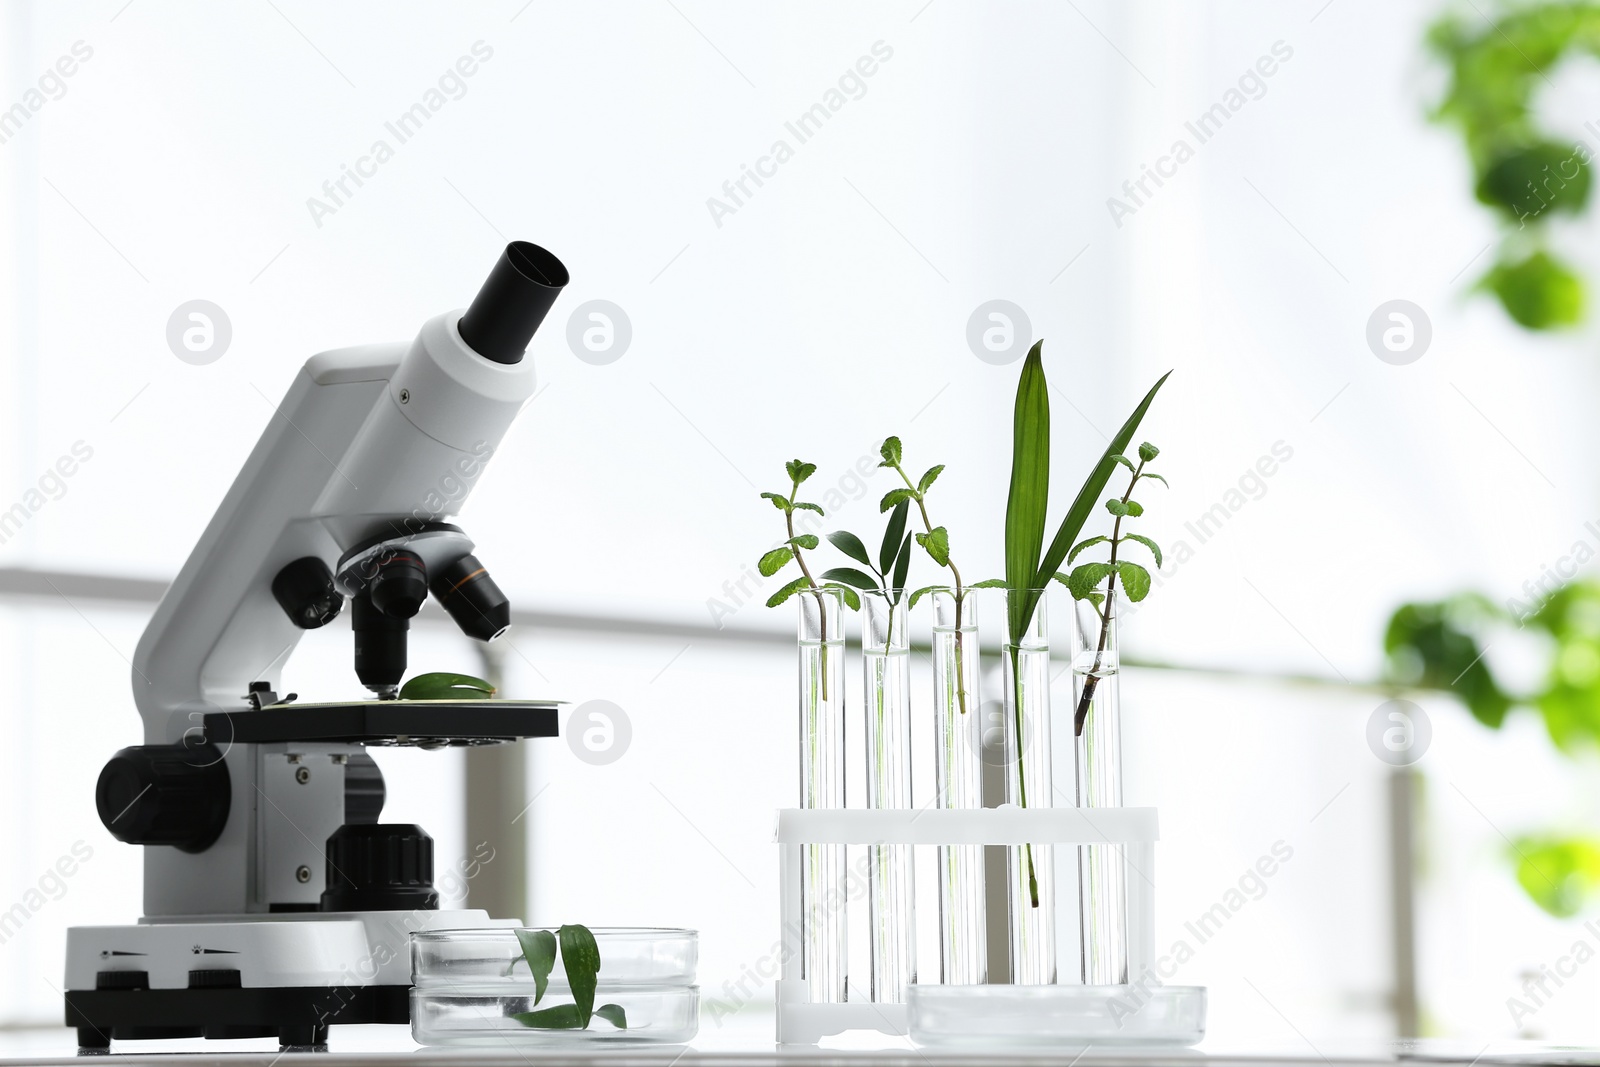 Photo of Laboratory glassware with different plants and microscope on table against blurred background. Chemistry research